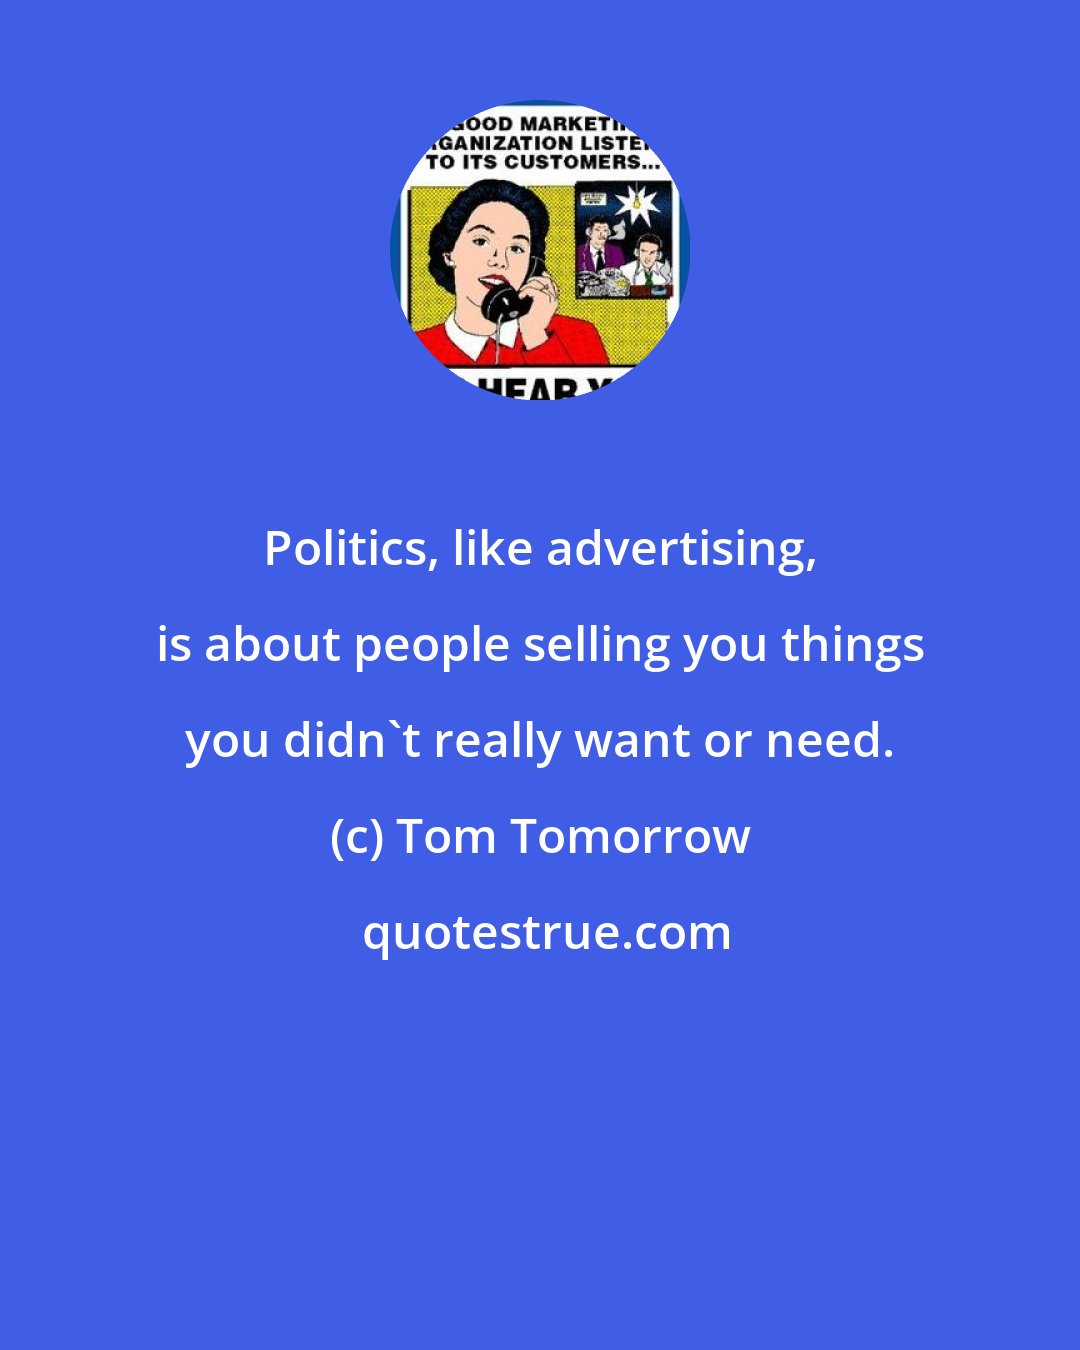 Tom Tomorrow: Politics, like advertising, is about people selling you things you didn't really want or need.